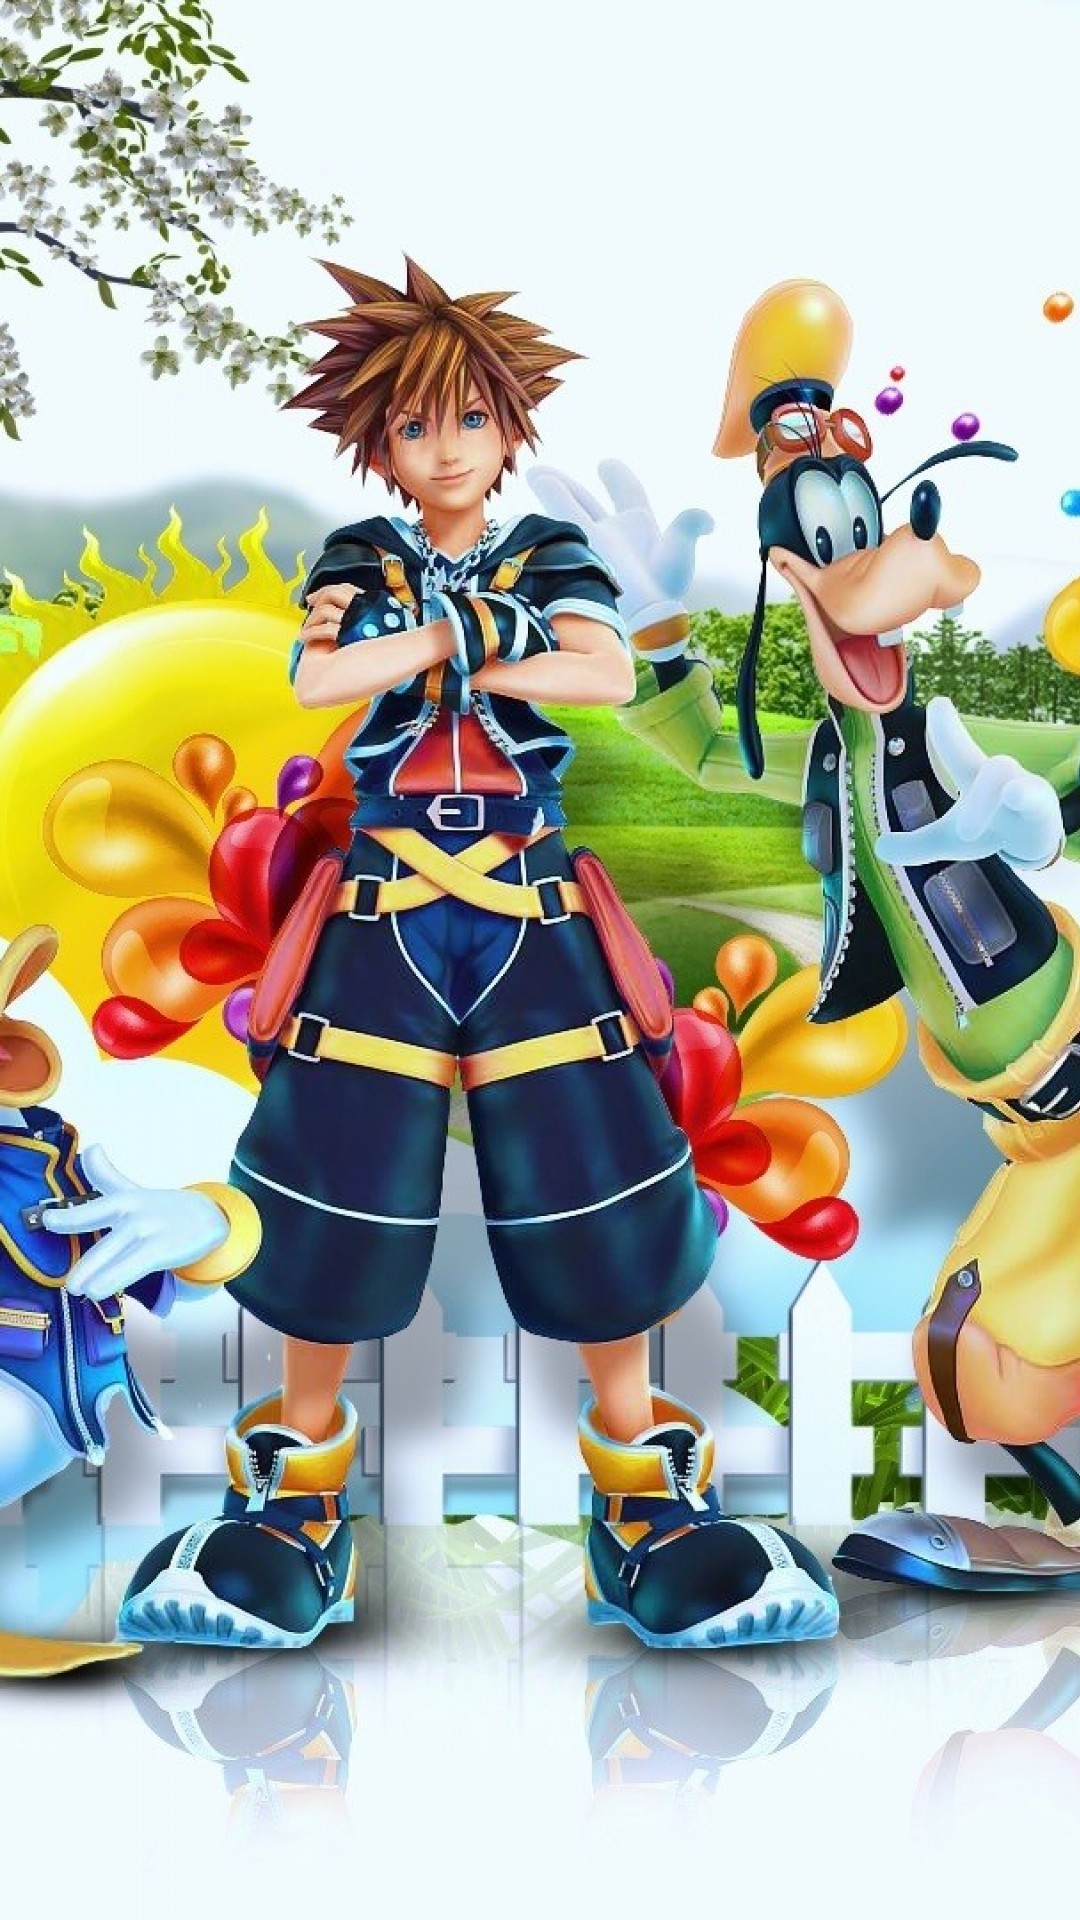 Kingdom hearts iPhone wallpaper for iPhone 6 plus